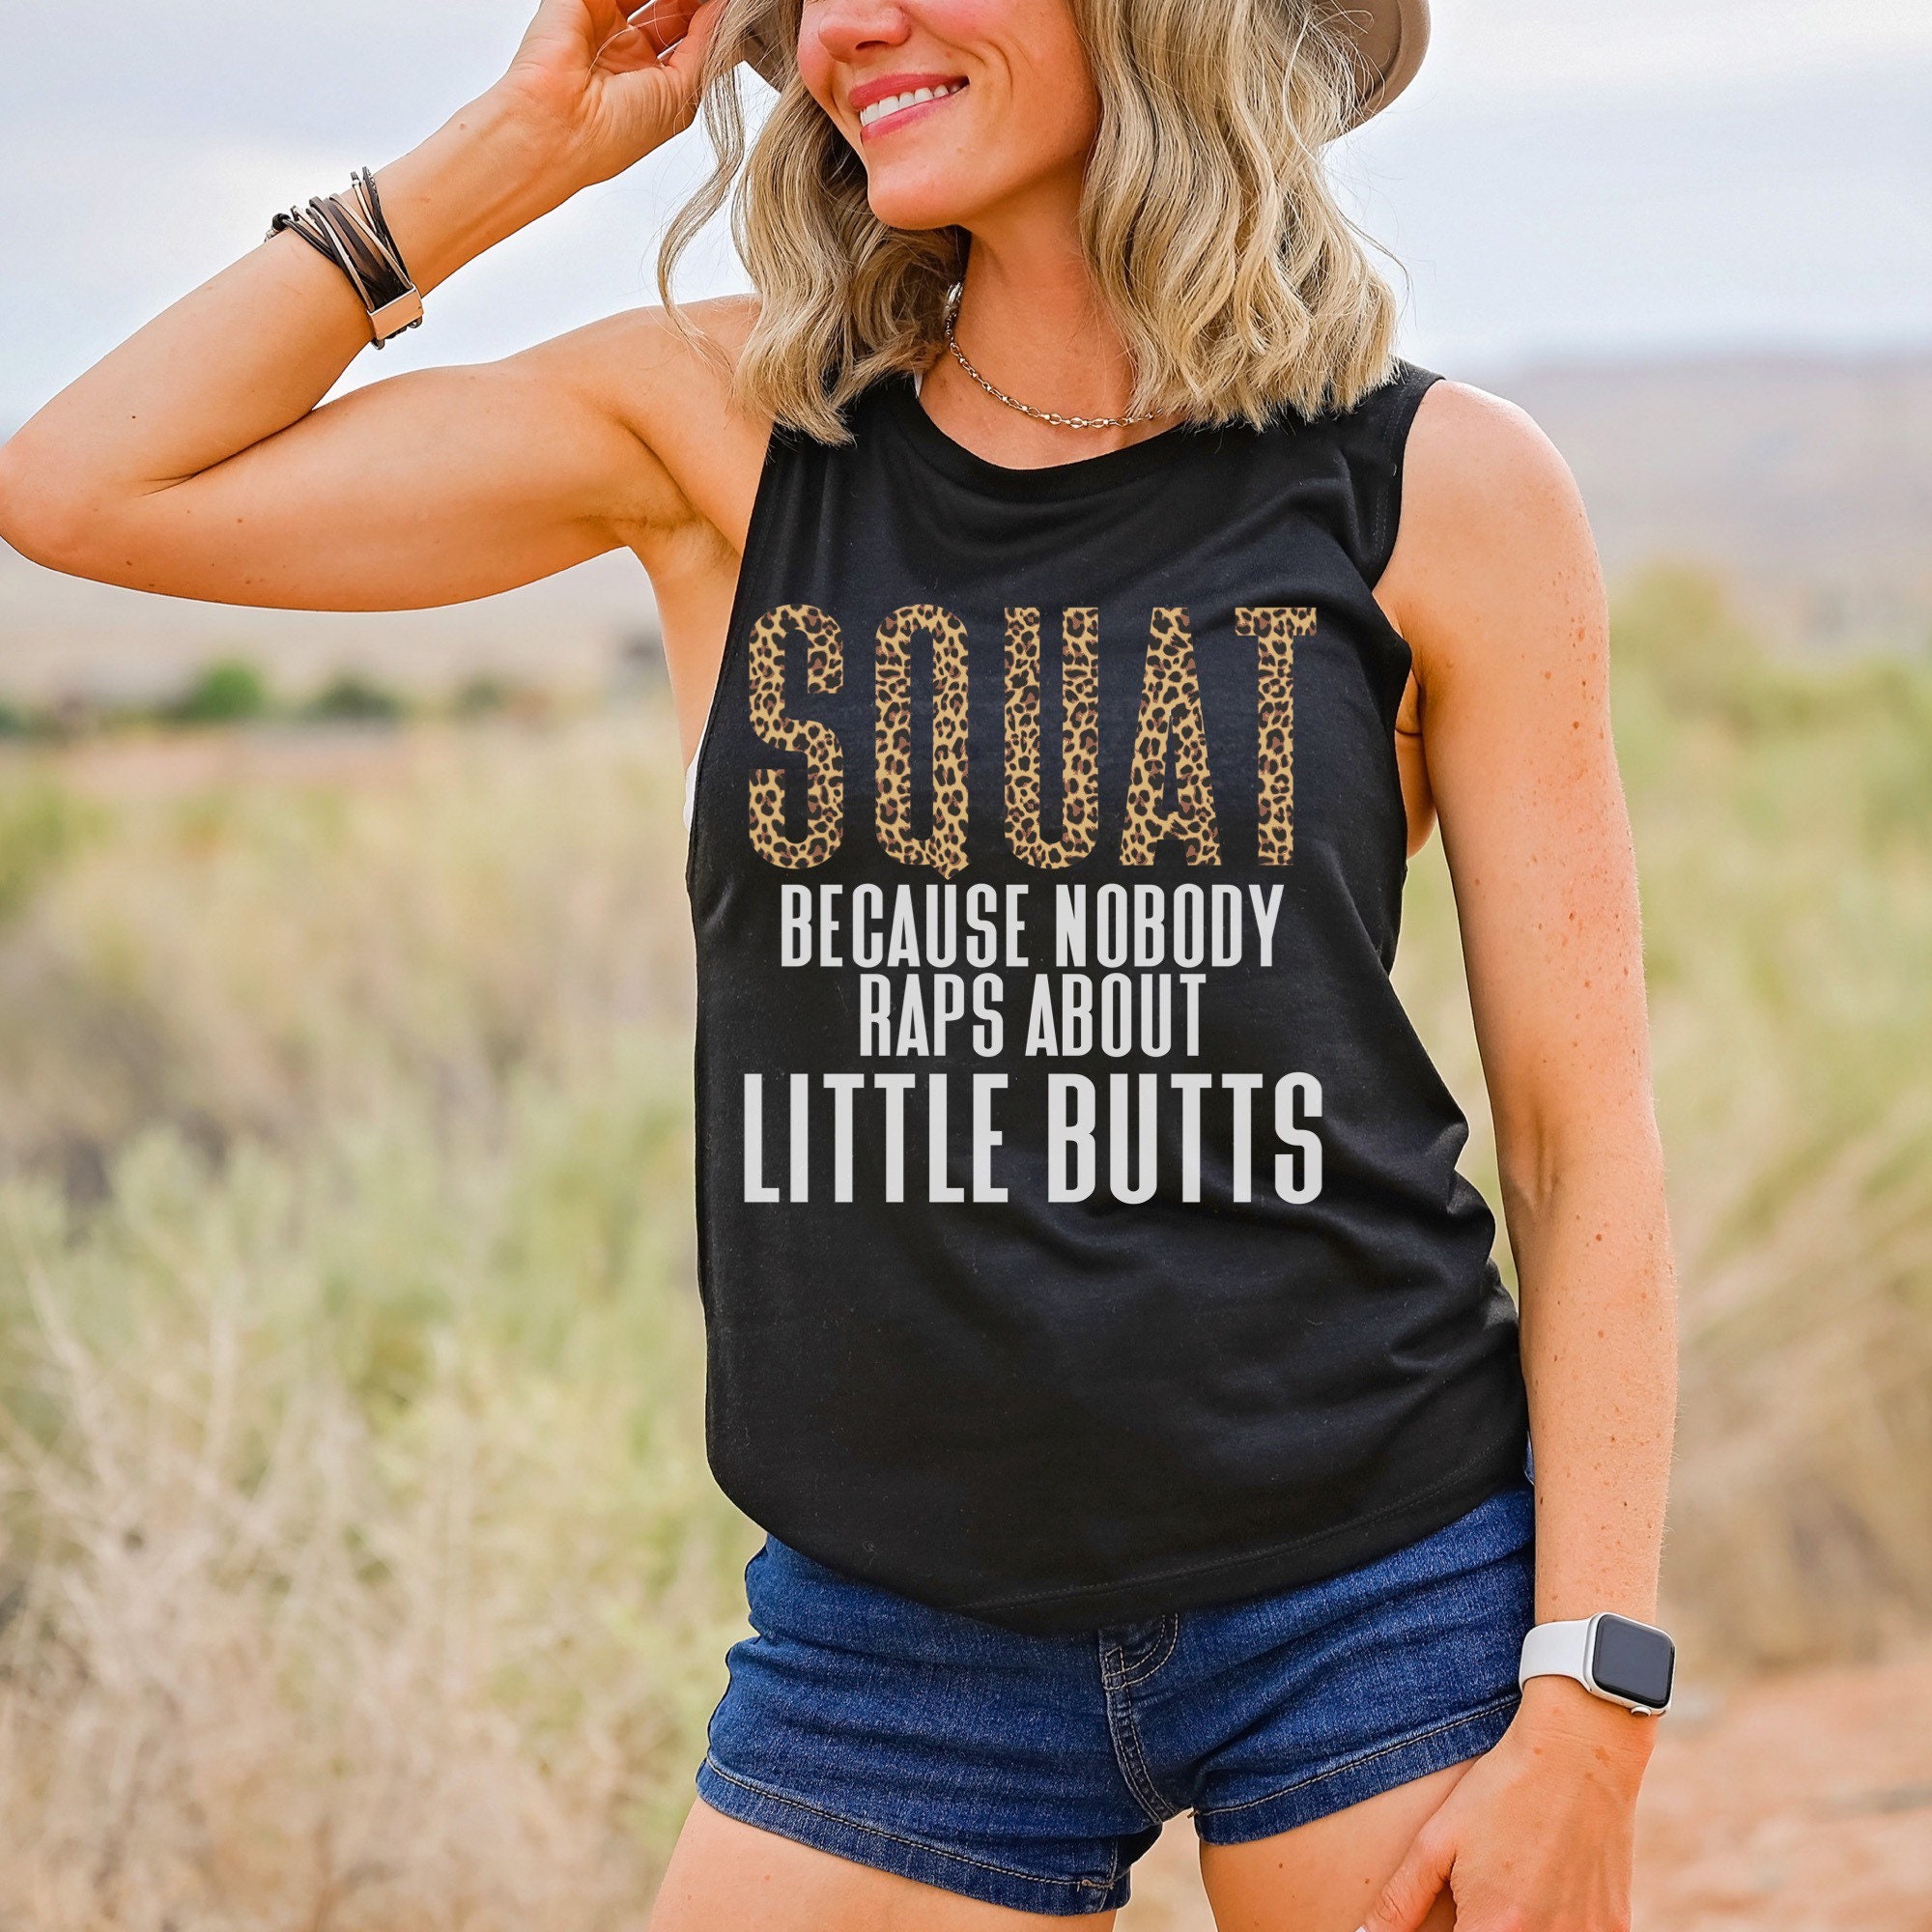 Squats Because Butts 